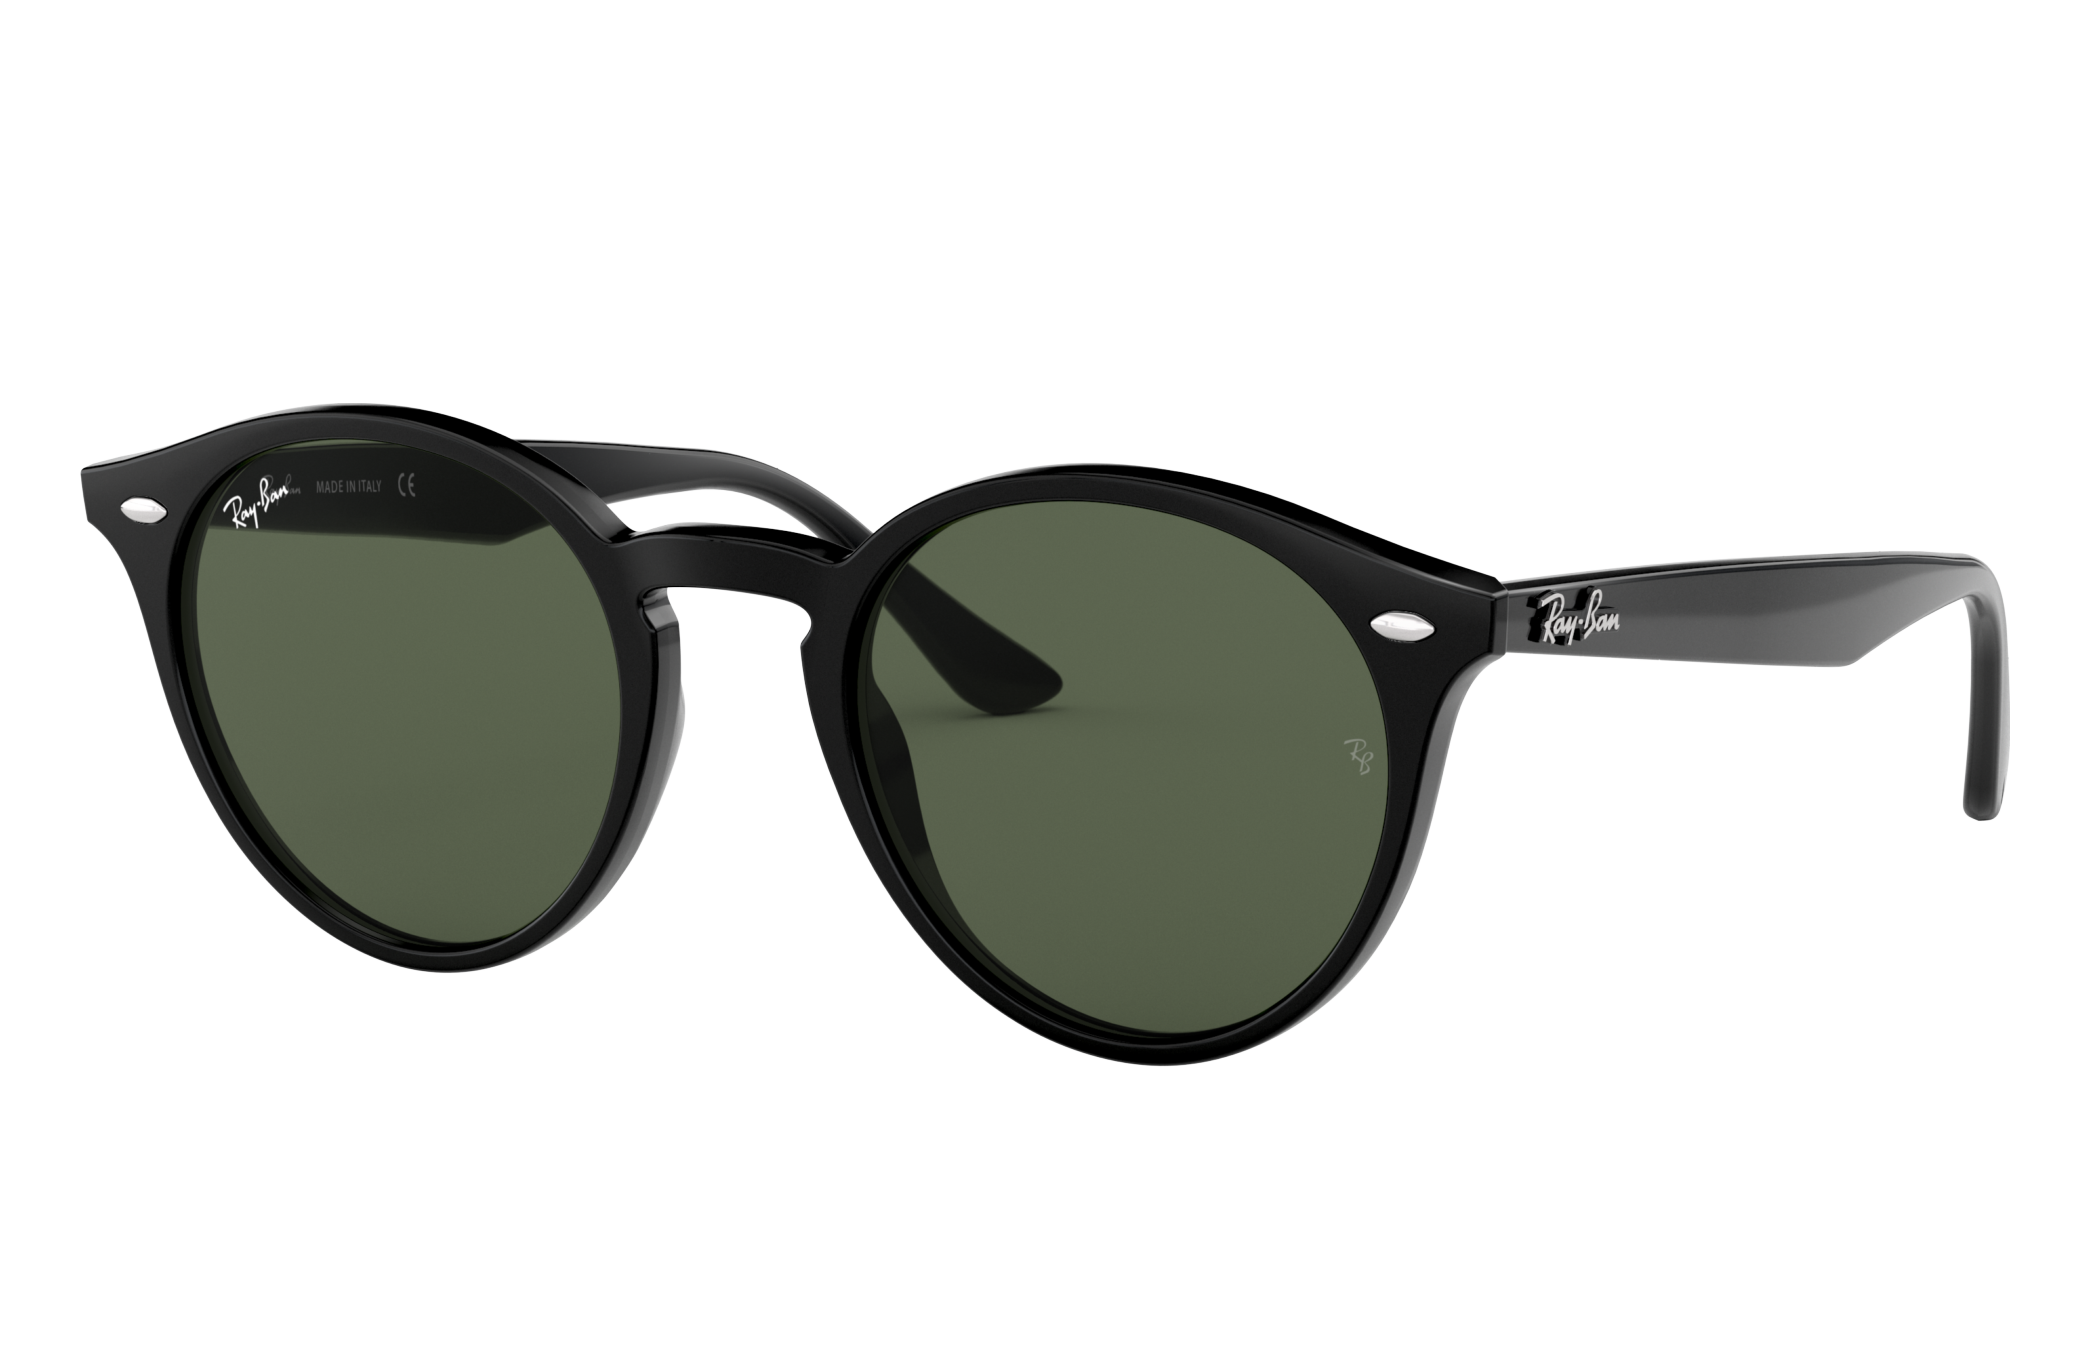 ray ban rb2180 clip on